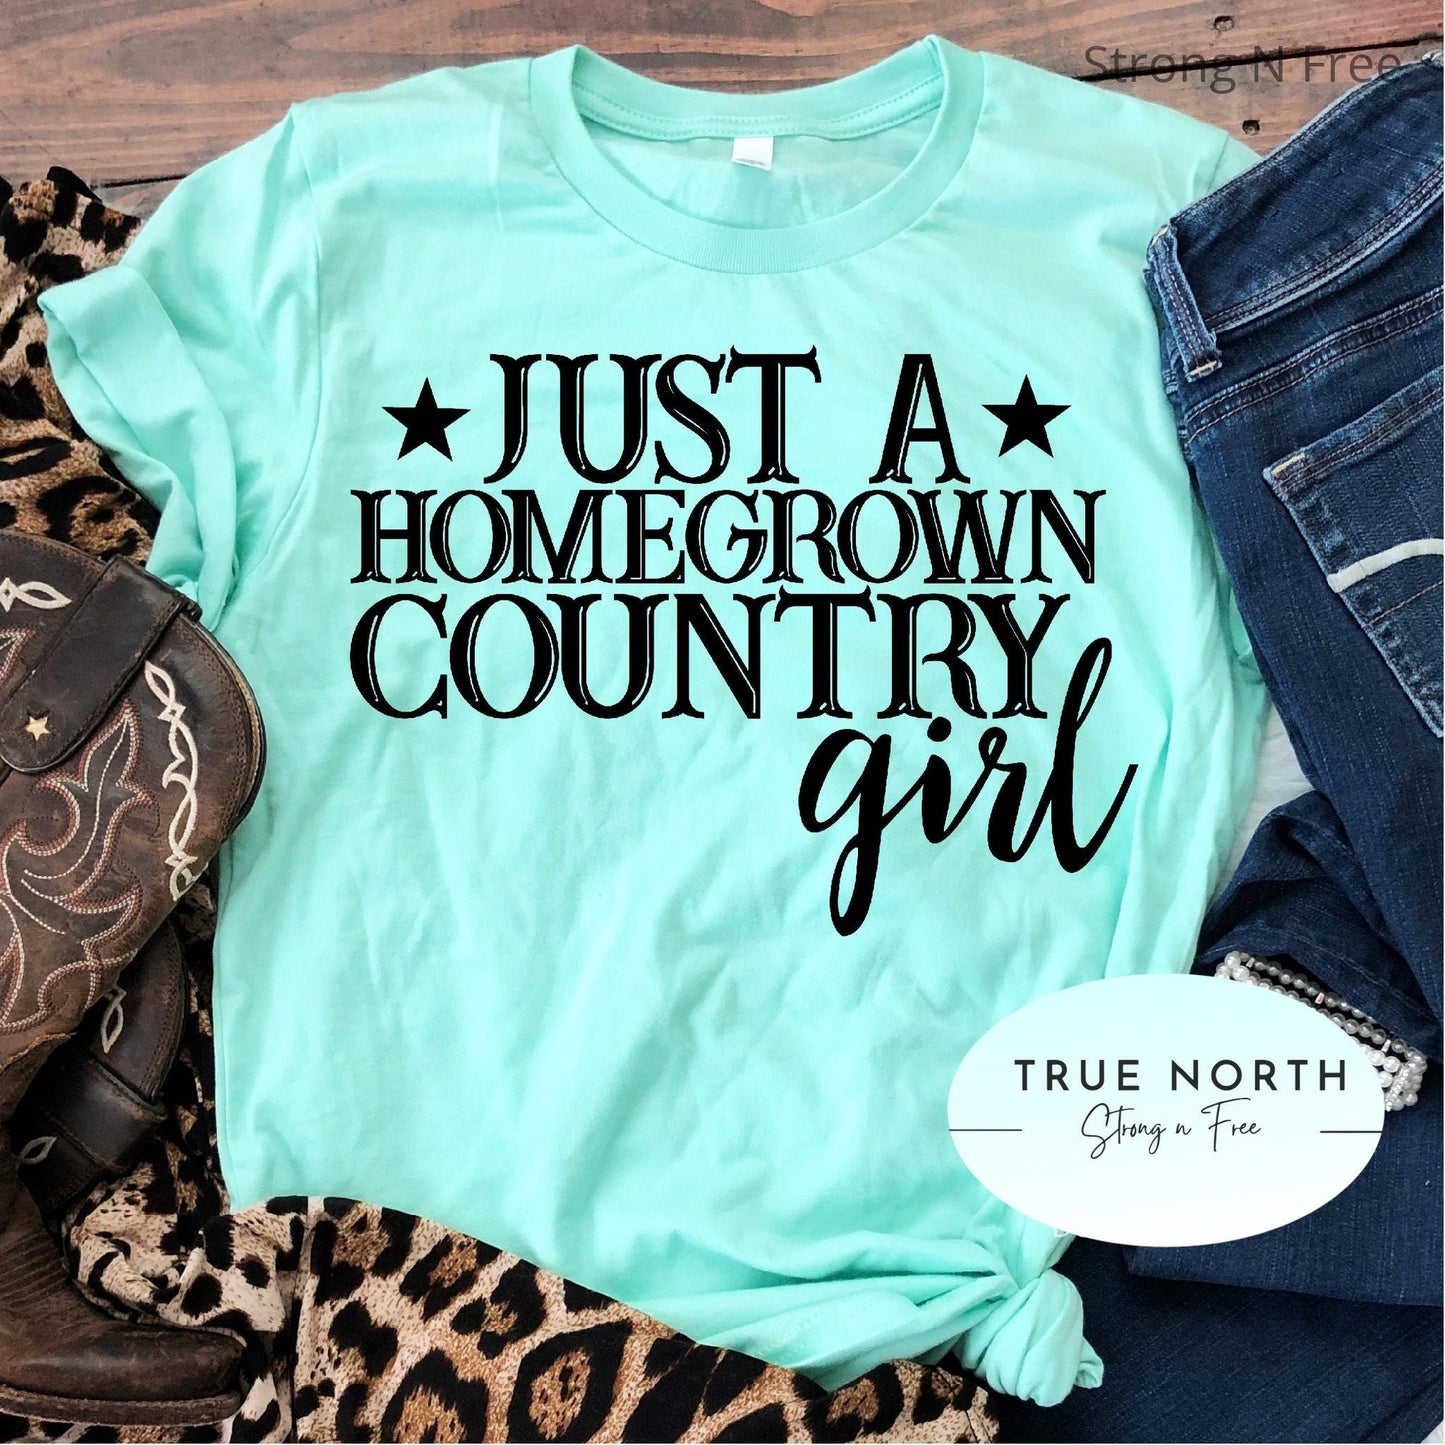 Just a Small Town Girl Shirt, Country Girl Shirt, Cowgirl Shirt, Southern Girl Shirt, Western Shirt .